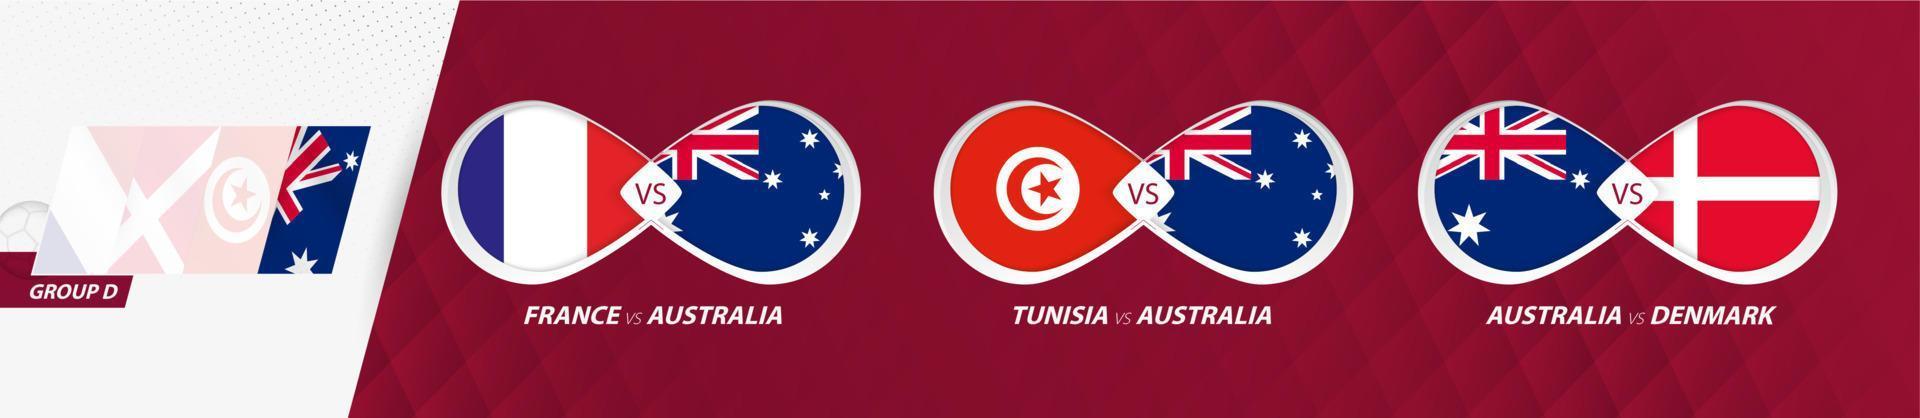 Australia national team matches in group D, football competition 2022, all games icon in group stage. vector